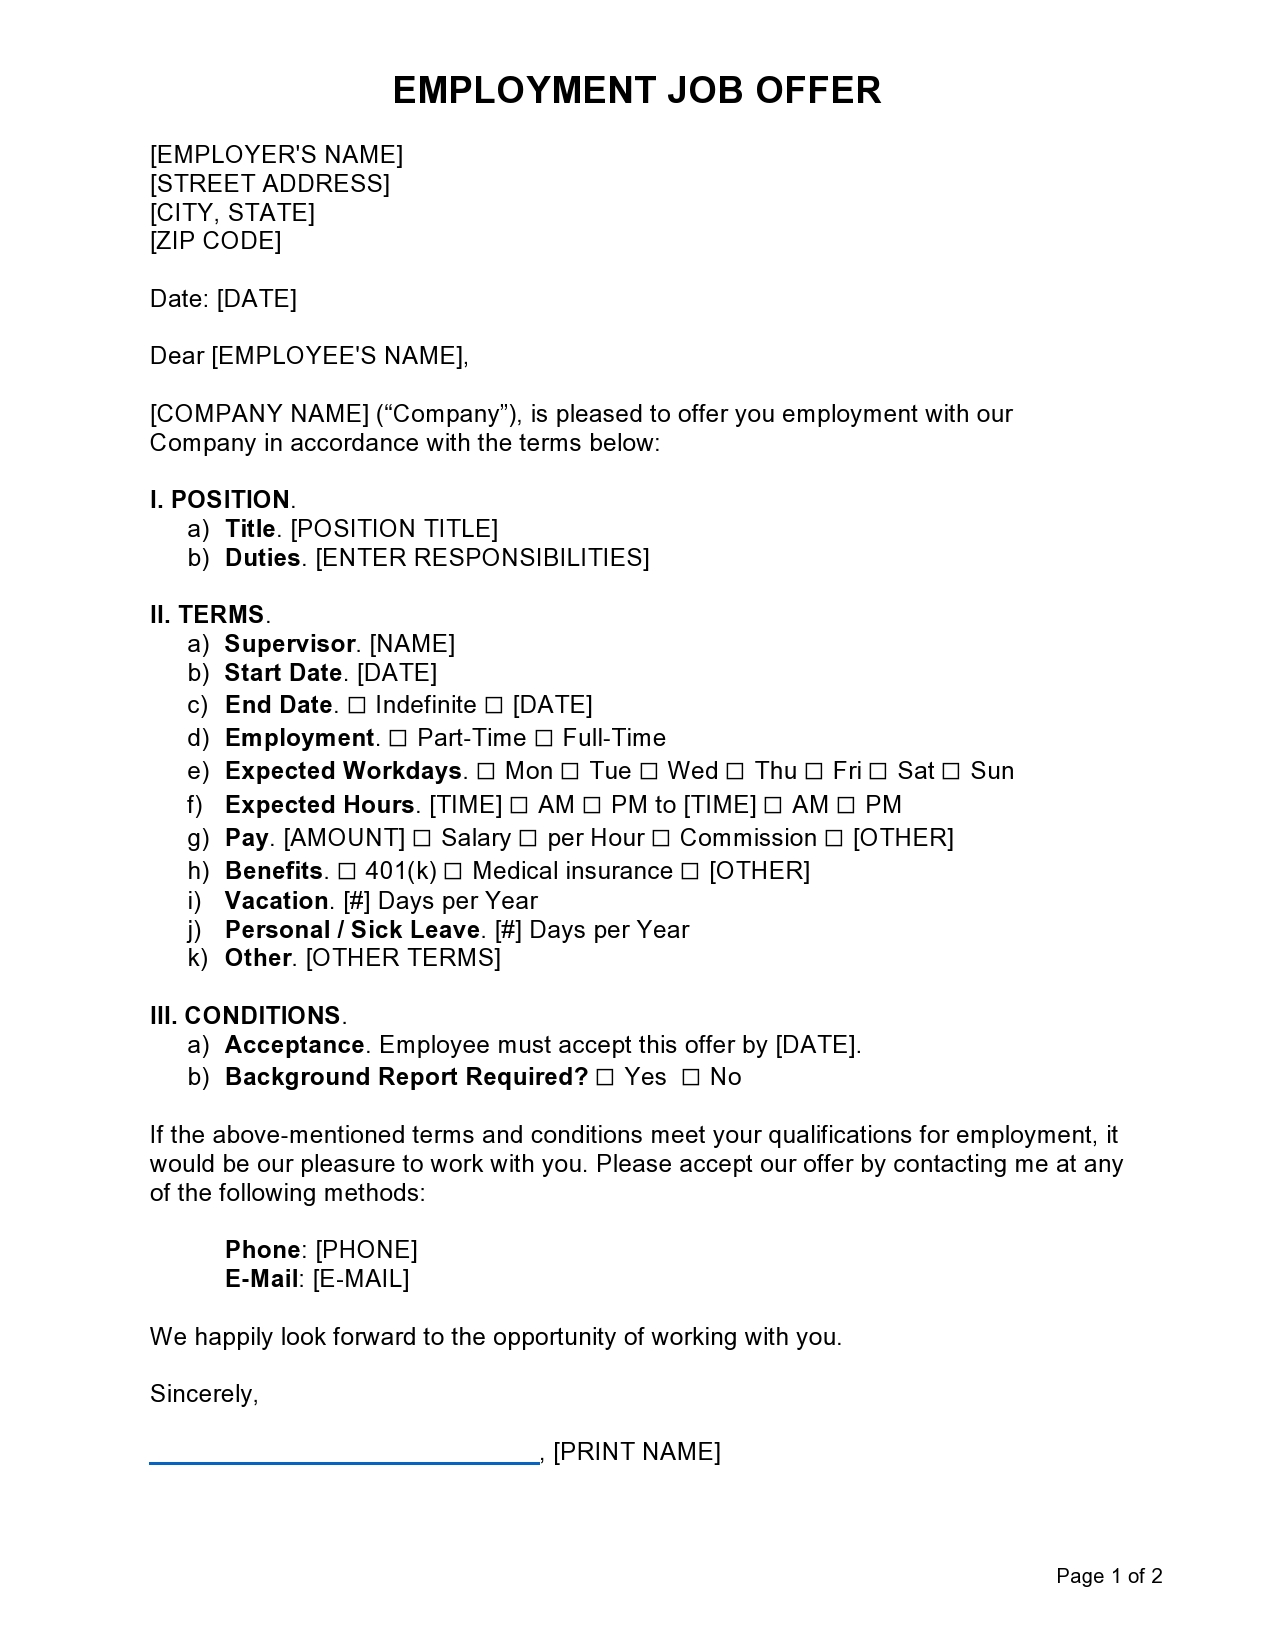 Free employment offer letter template 12